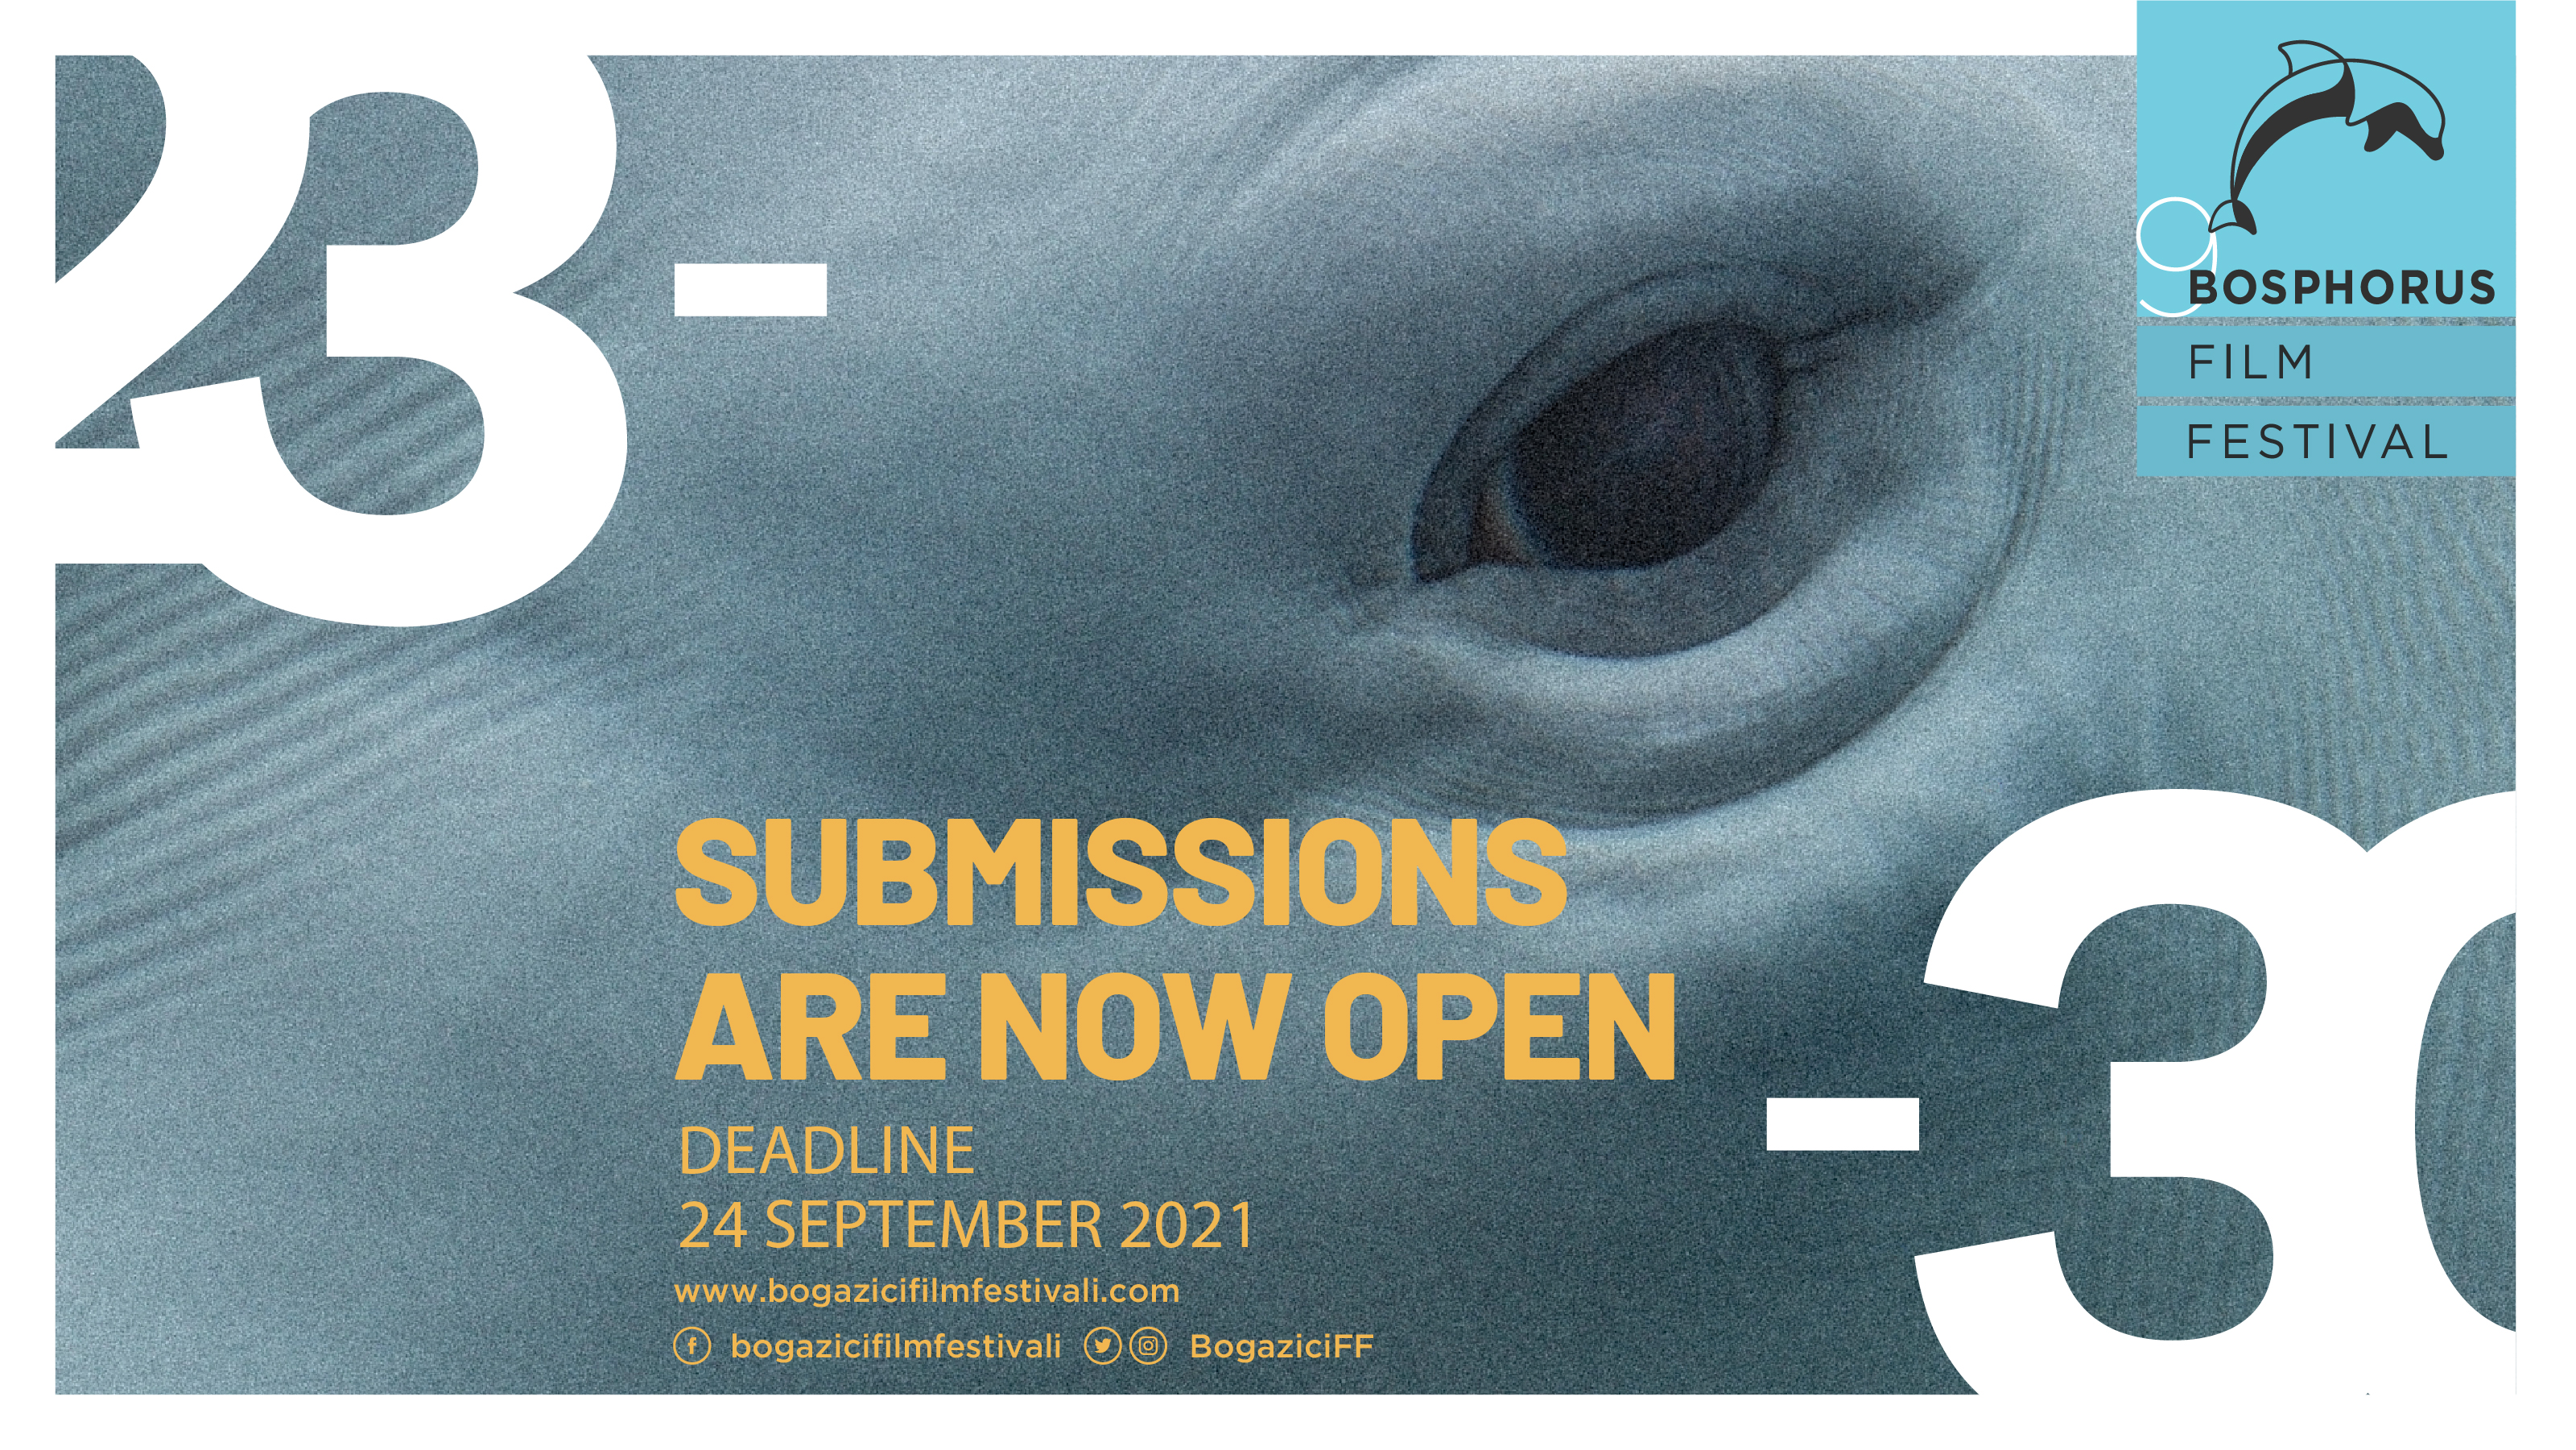 SUBMISSIONS ARE NOW OPEN FOR THE 9TH BOSPHORUS FILM FESTIVAL